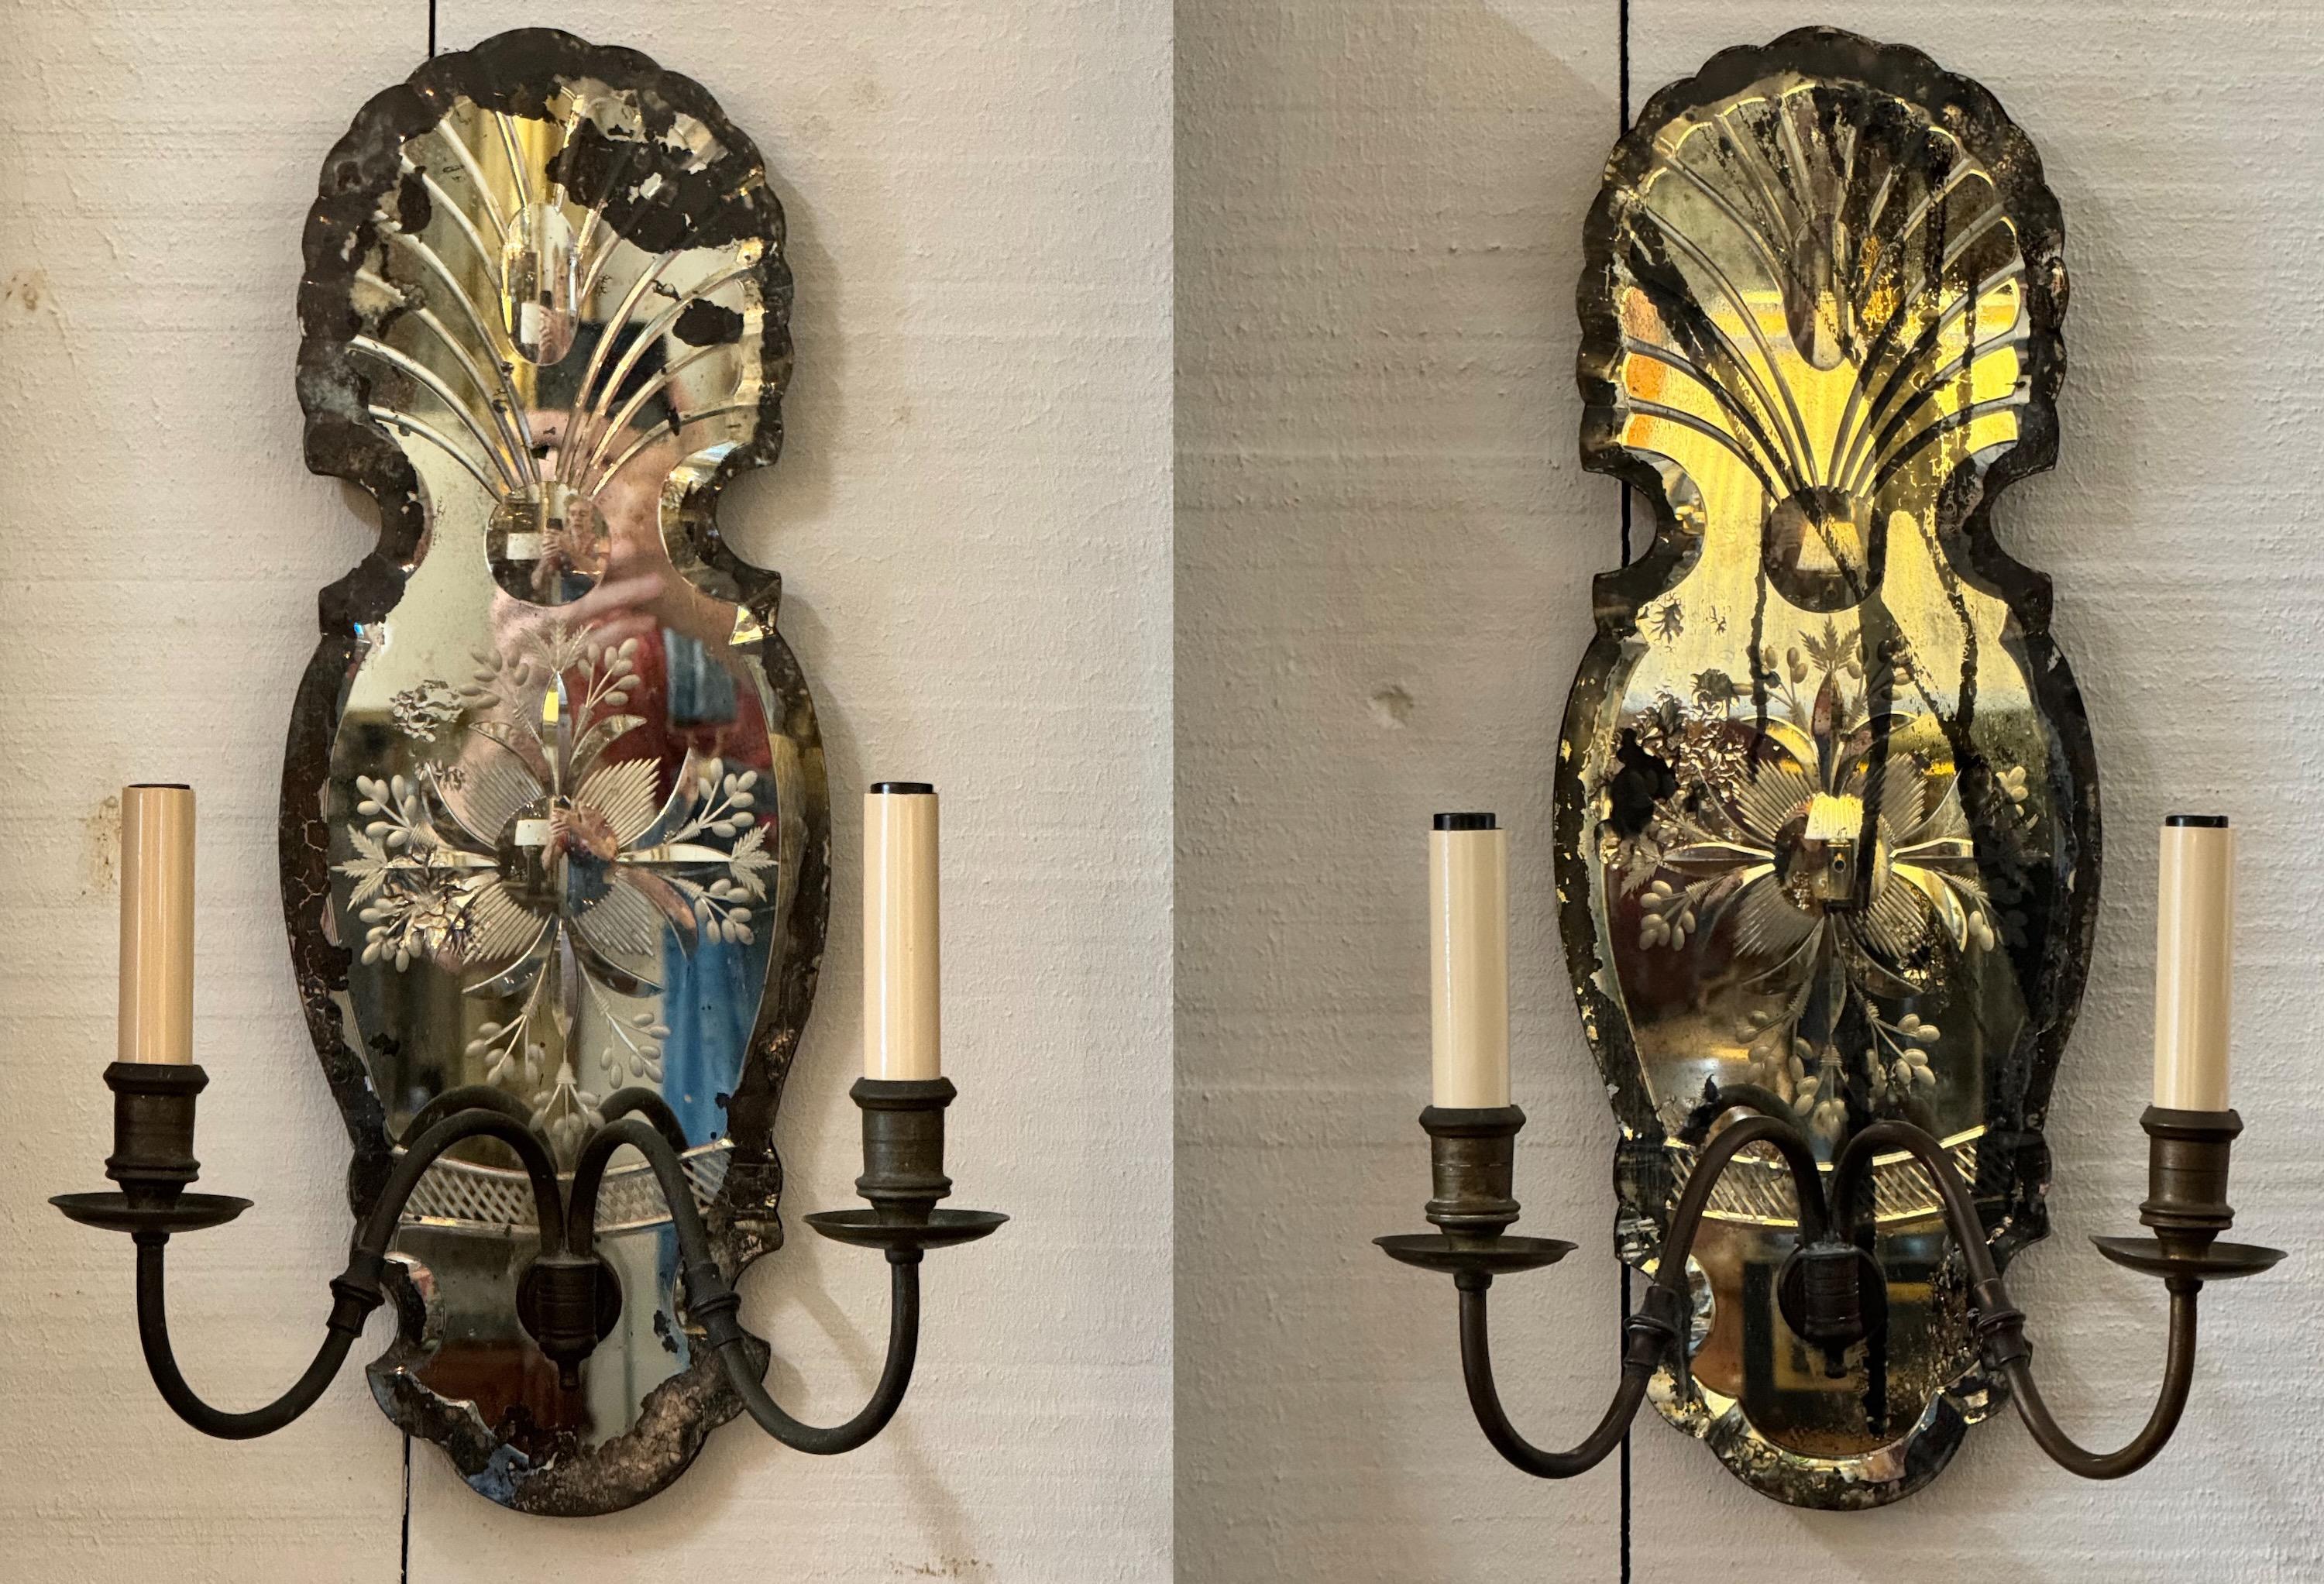 We love mirrored sconces. They add so much charm to any room.